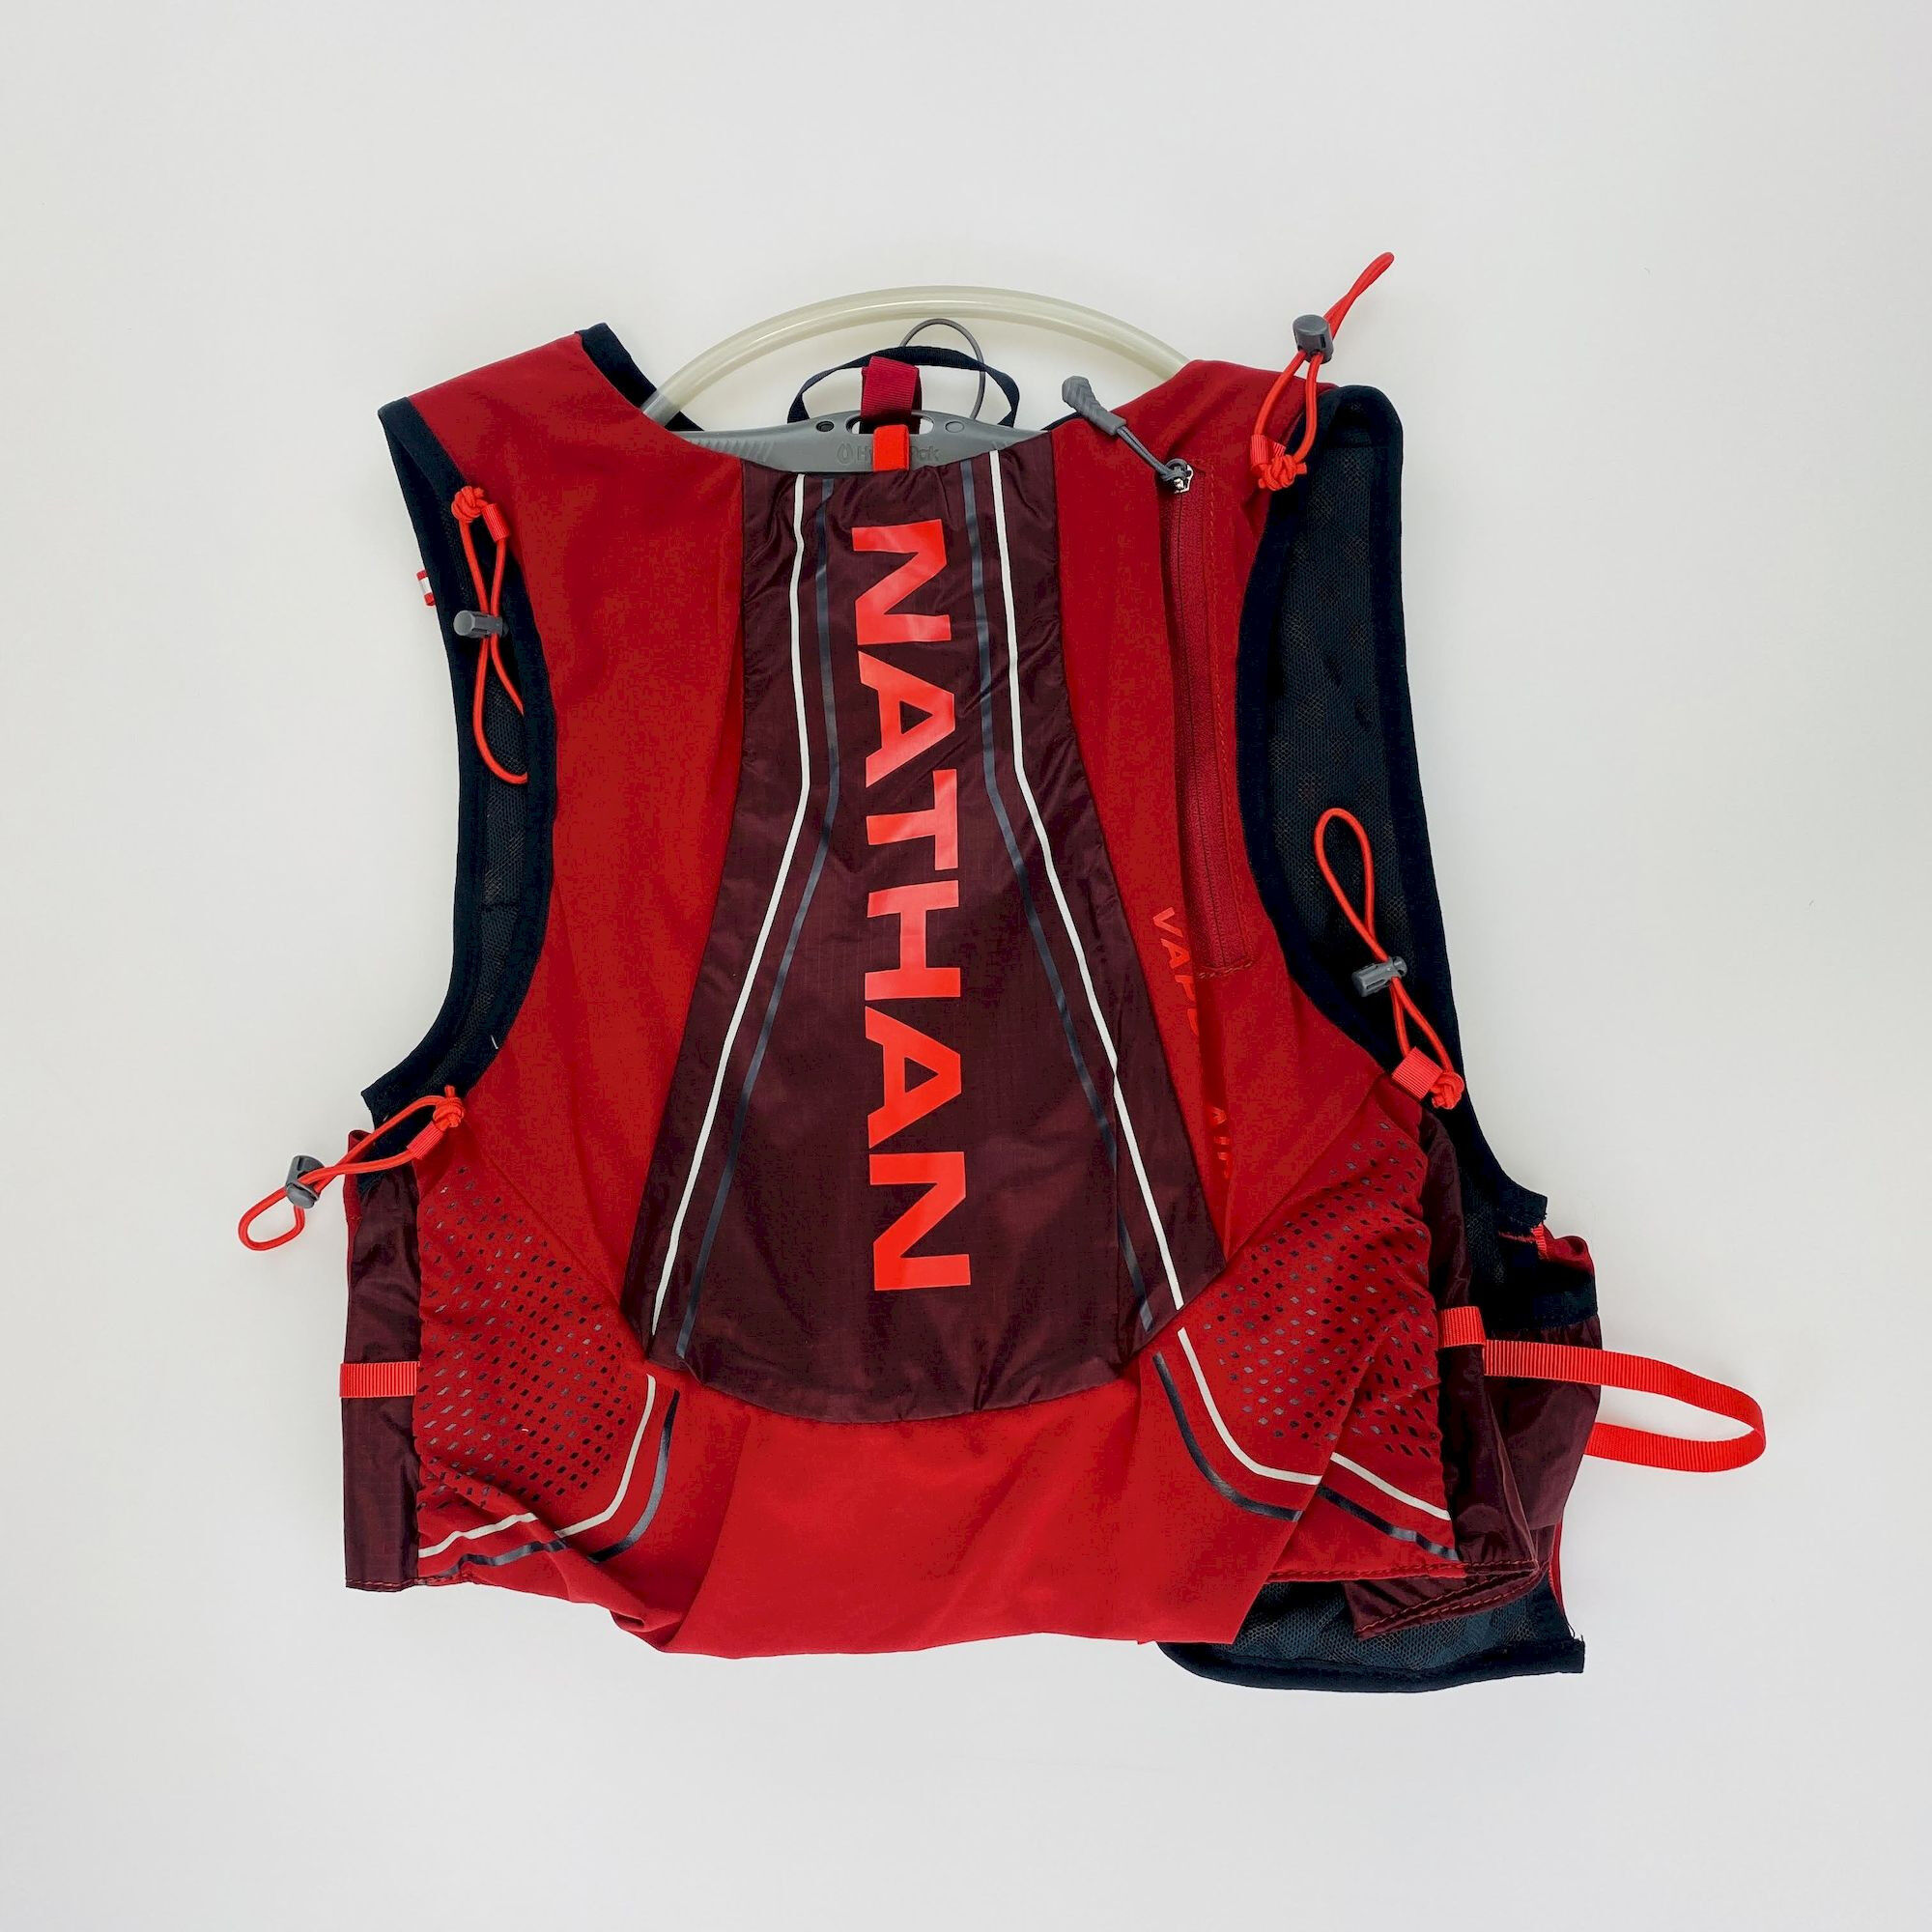 Nathan VaporAir 2 7L - (2L Bladder Included) - Second Hand Trail running backpack - Red - L/XXL | Hardloop